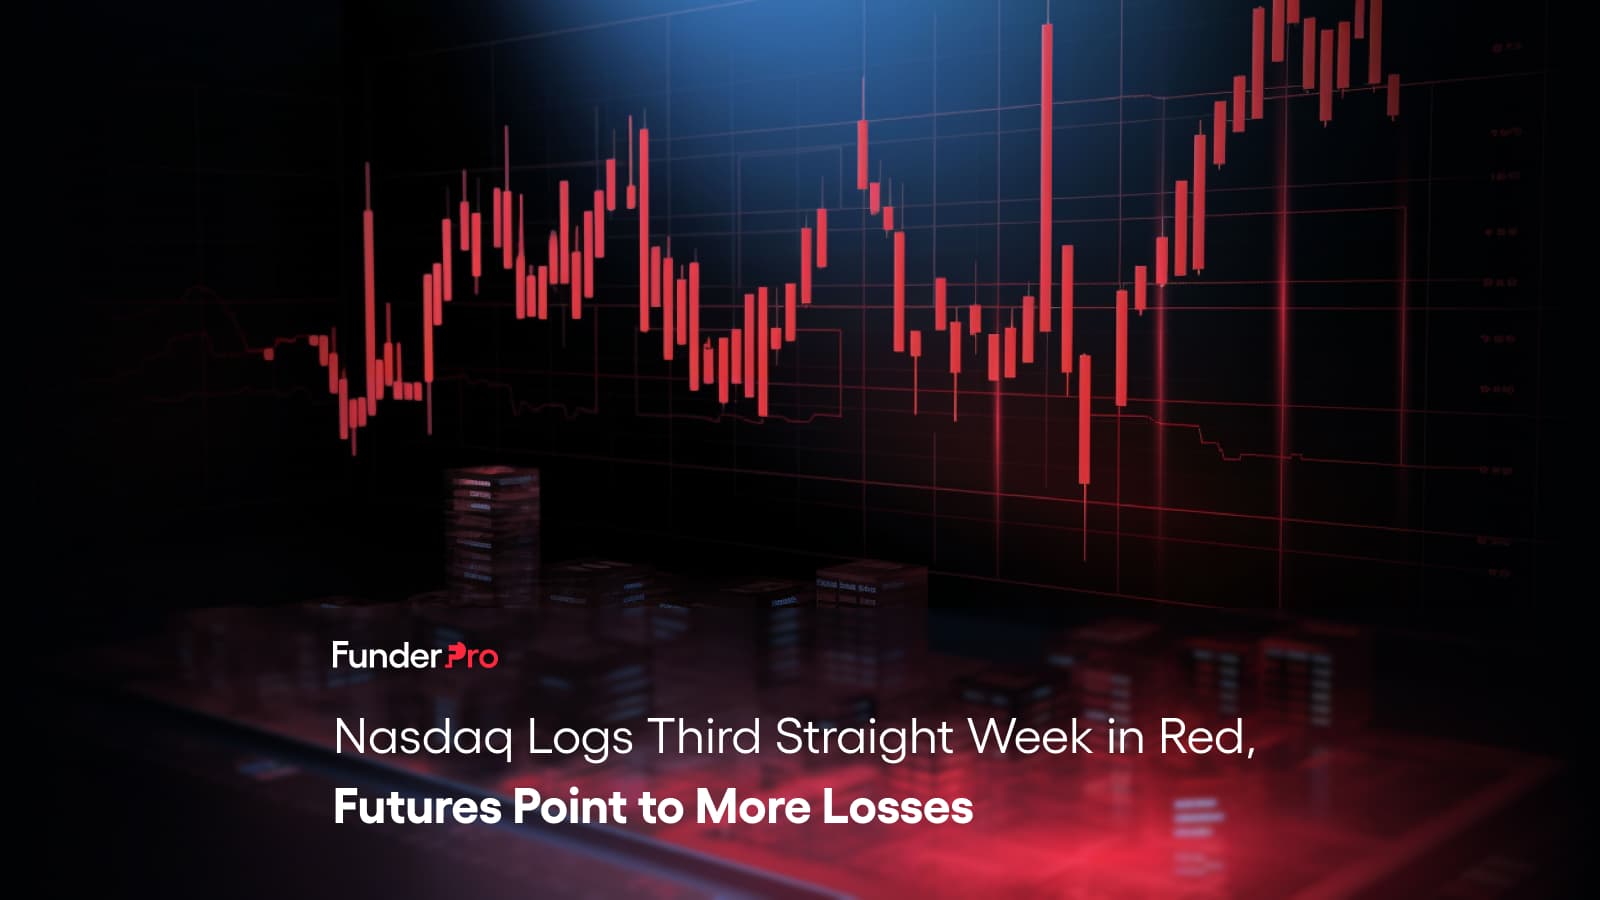 Nasdaq Logs Third Straight Week in Red, Futures Point to More Losses